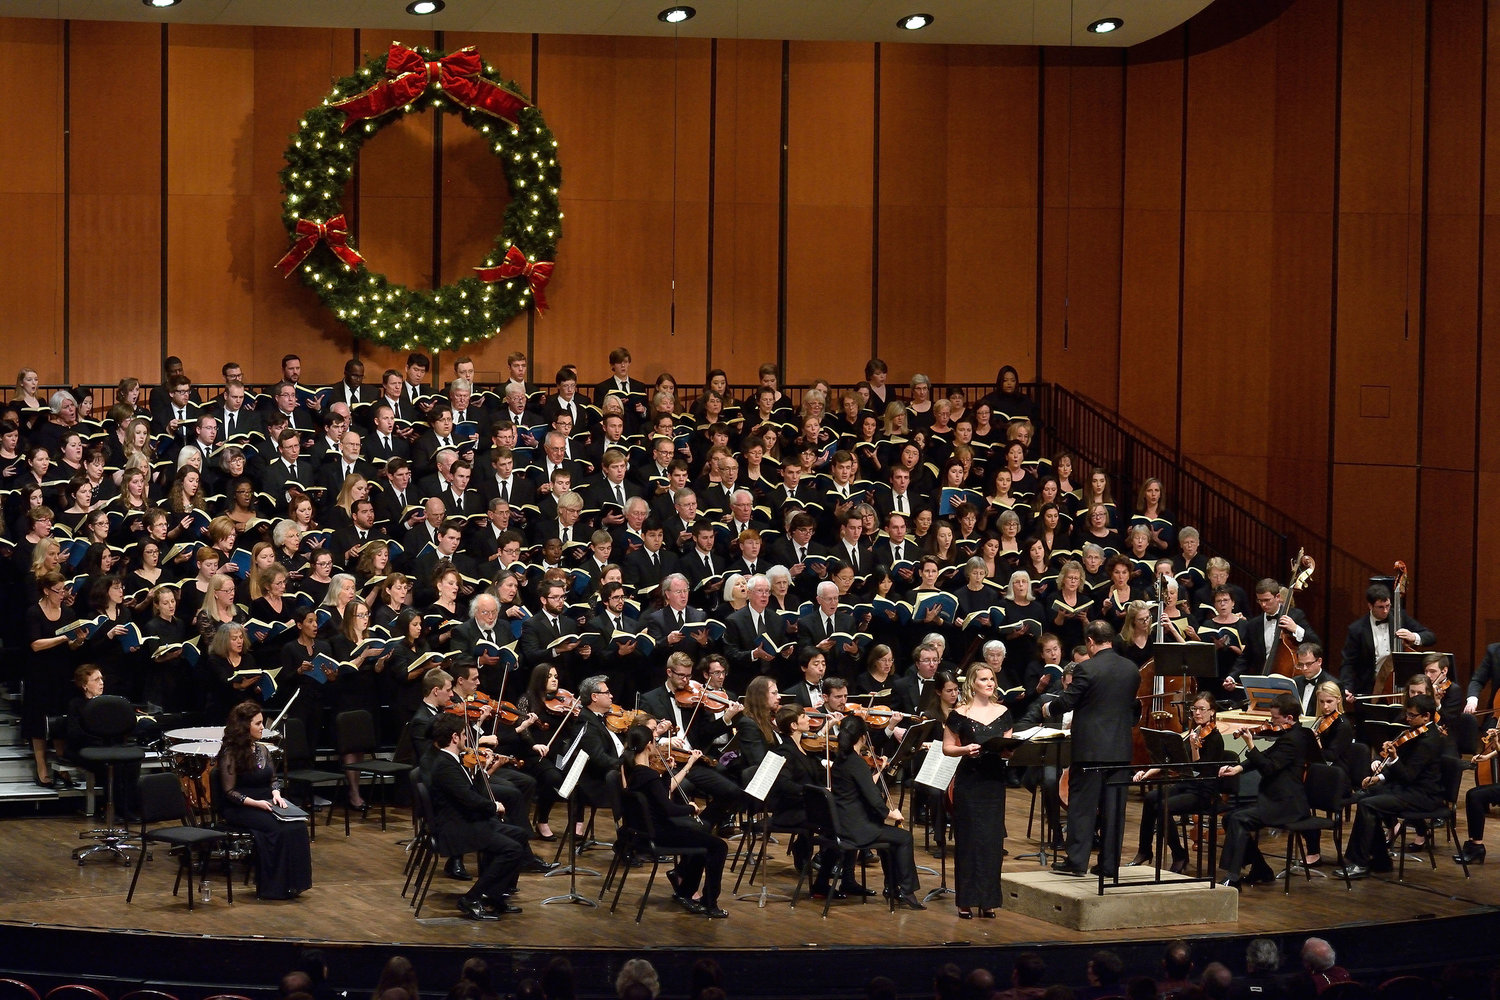 On Saturday evening, the MSU College of Music will host its annual holiday concert.